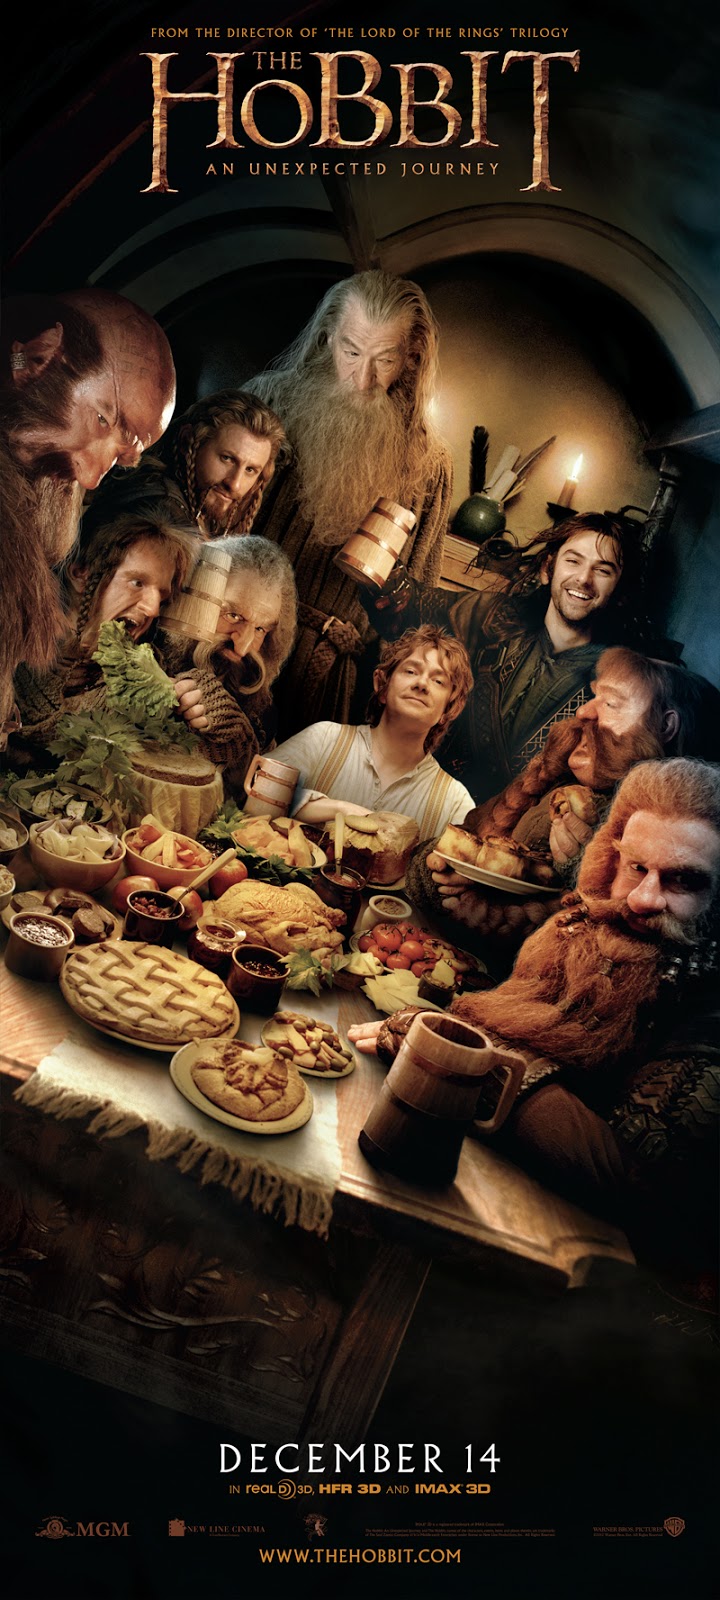 Hobbit Review Embargo Lifted, Spoilers Abound